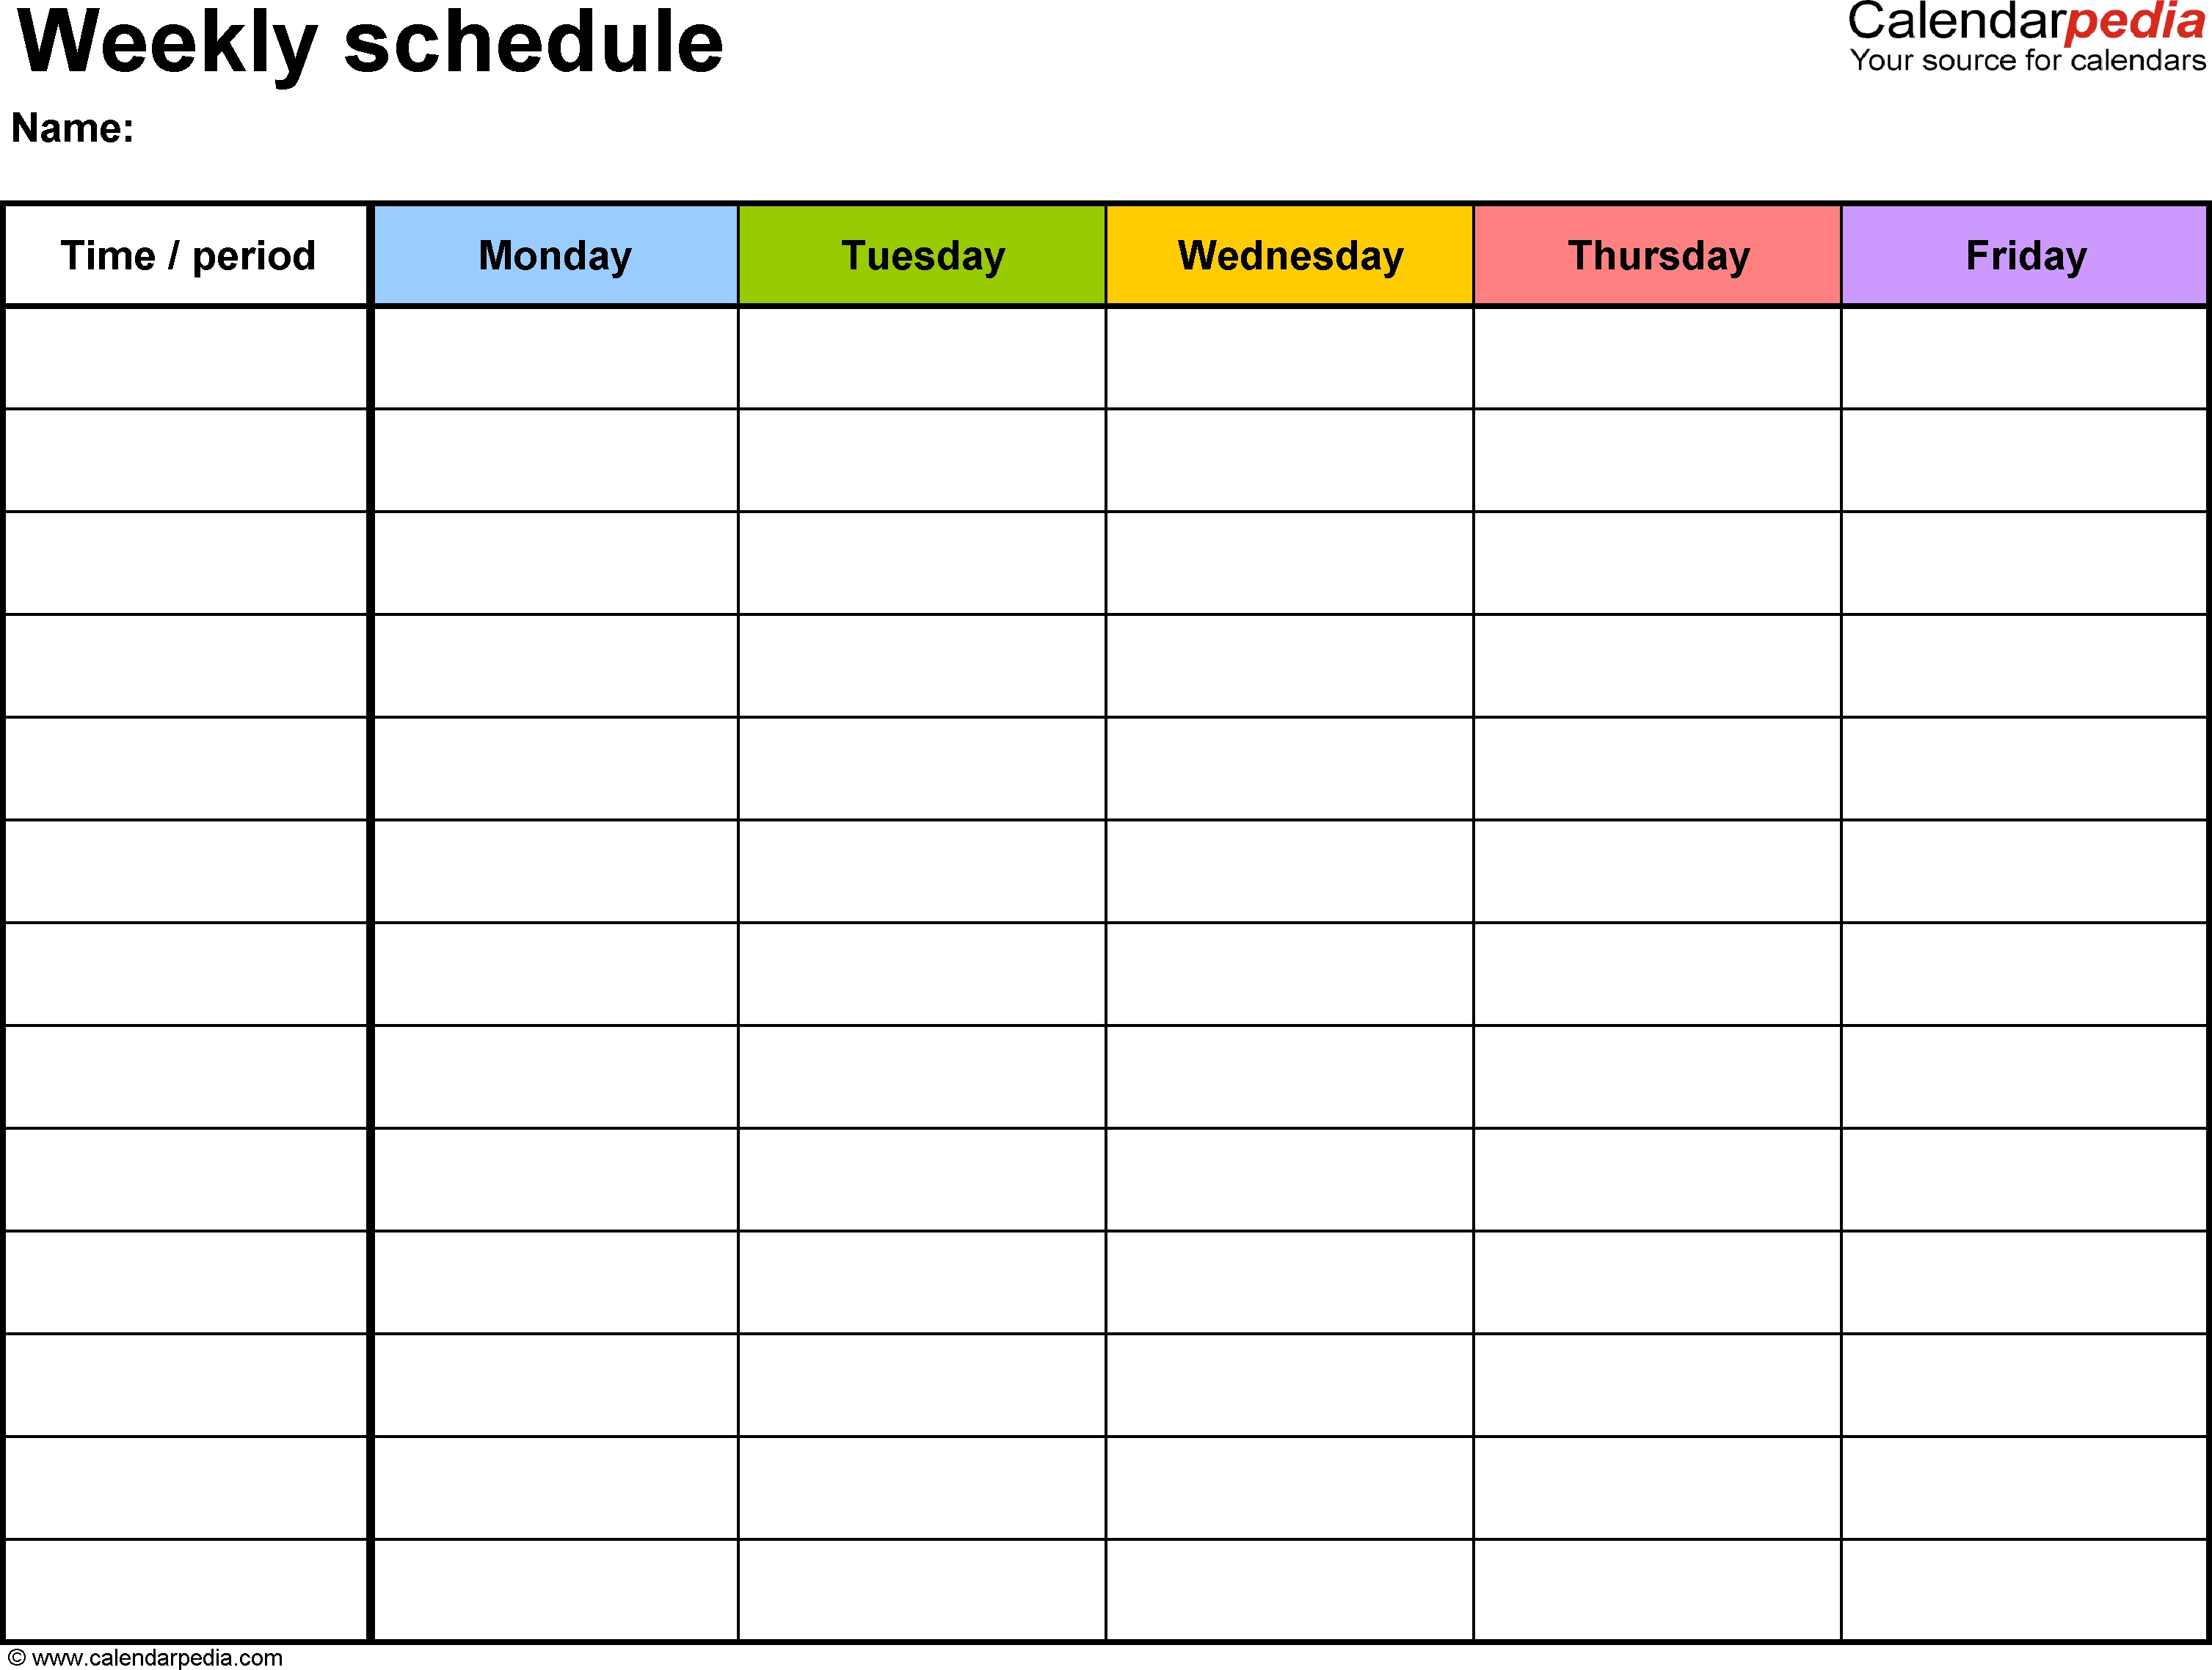 Free Weekly Schedule Templates For Word - 18 Templates with regard to A Peek At The Week Free Printable Weekly Planner